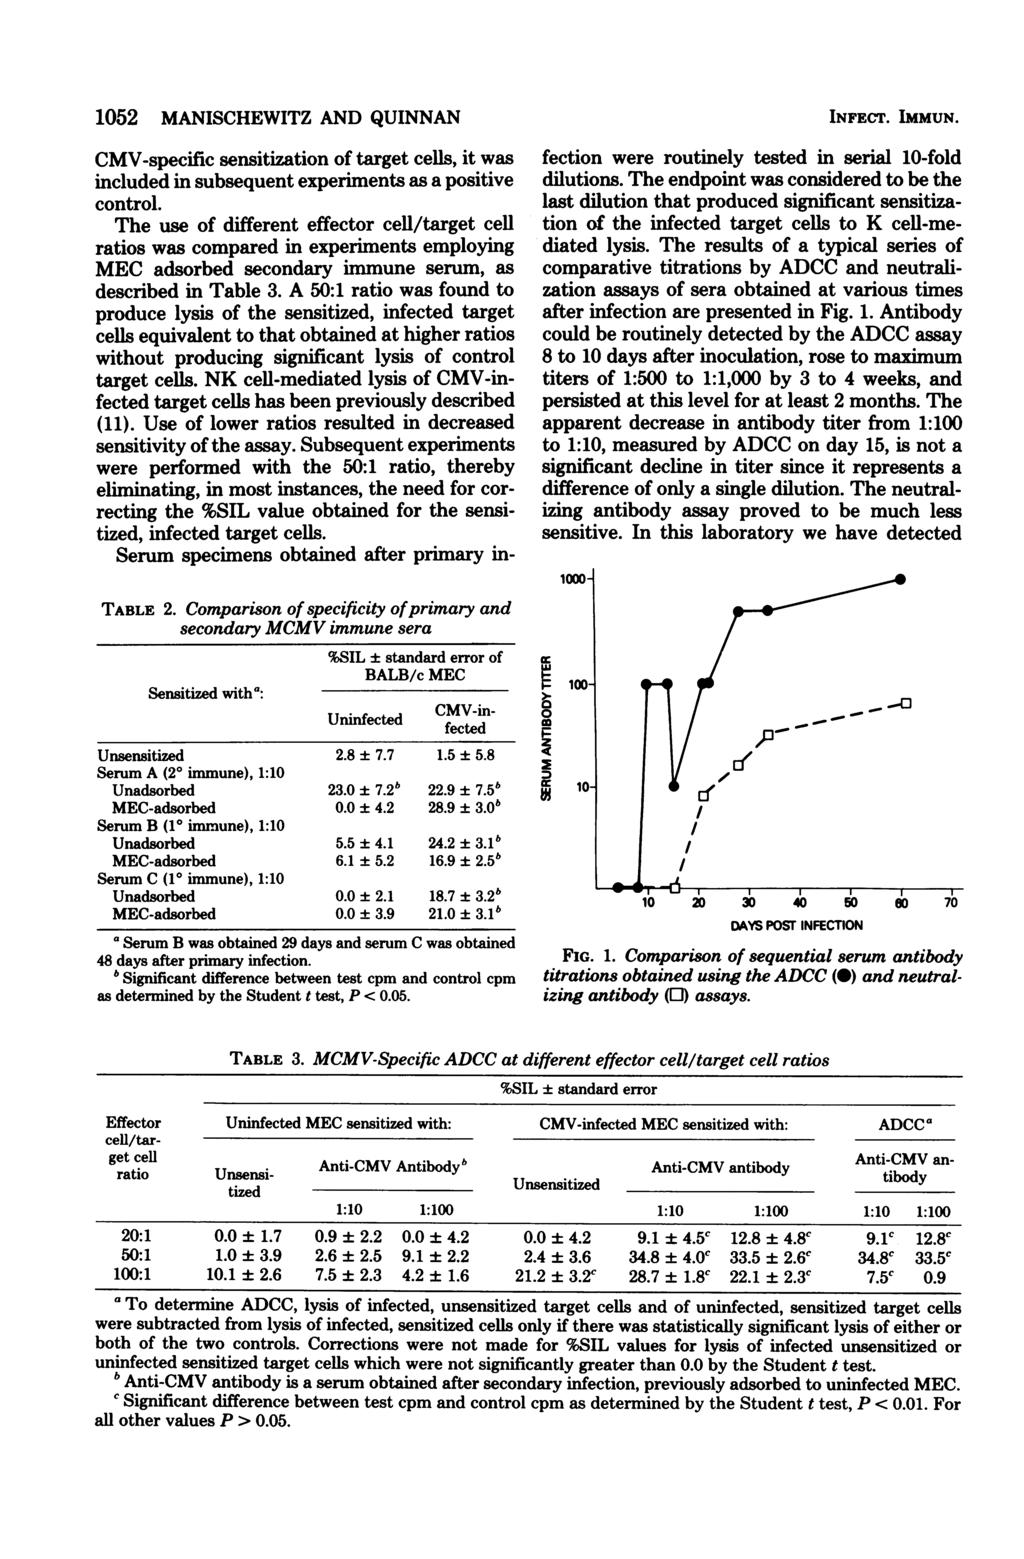 1052 MANISCHEWITZ AND QUINNAN CMV-specific sensitization of target cells, it was included in subsequent experiments as a positive control.